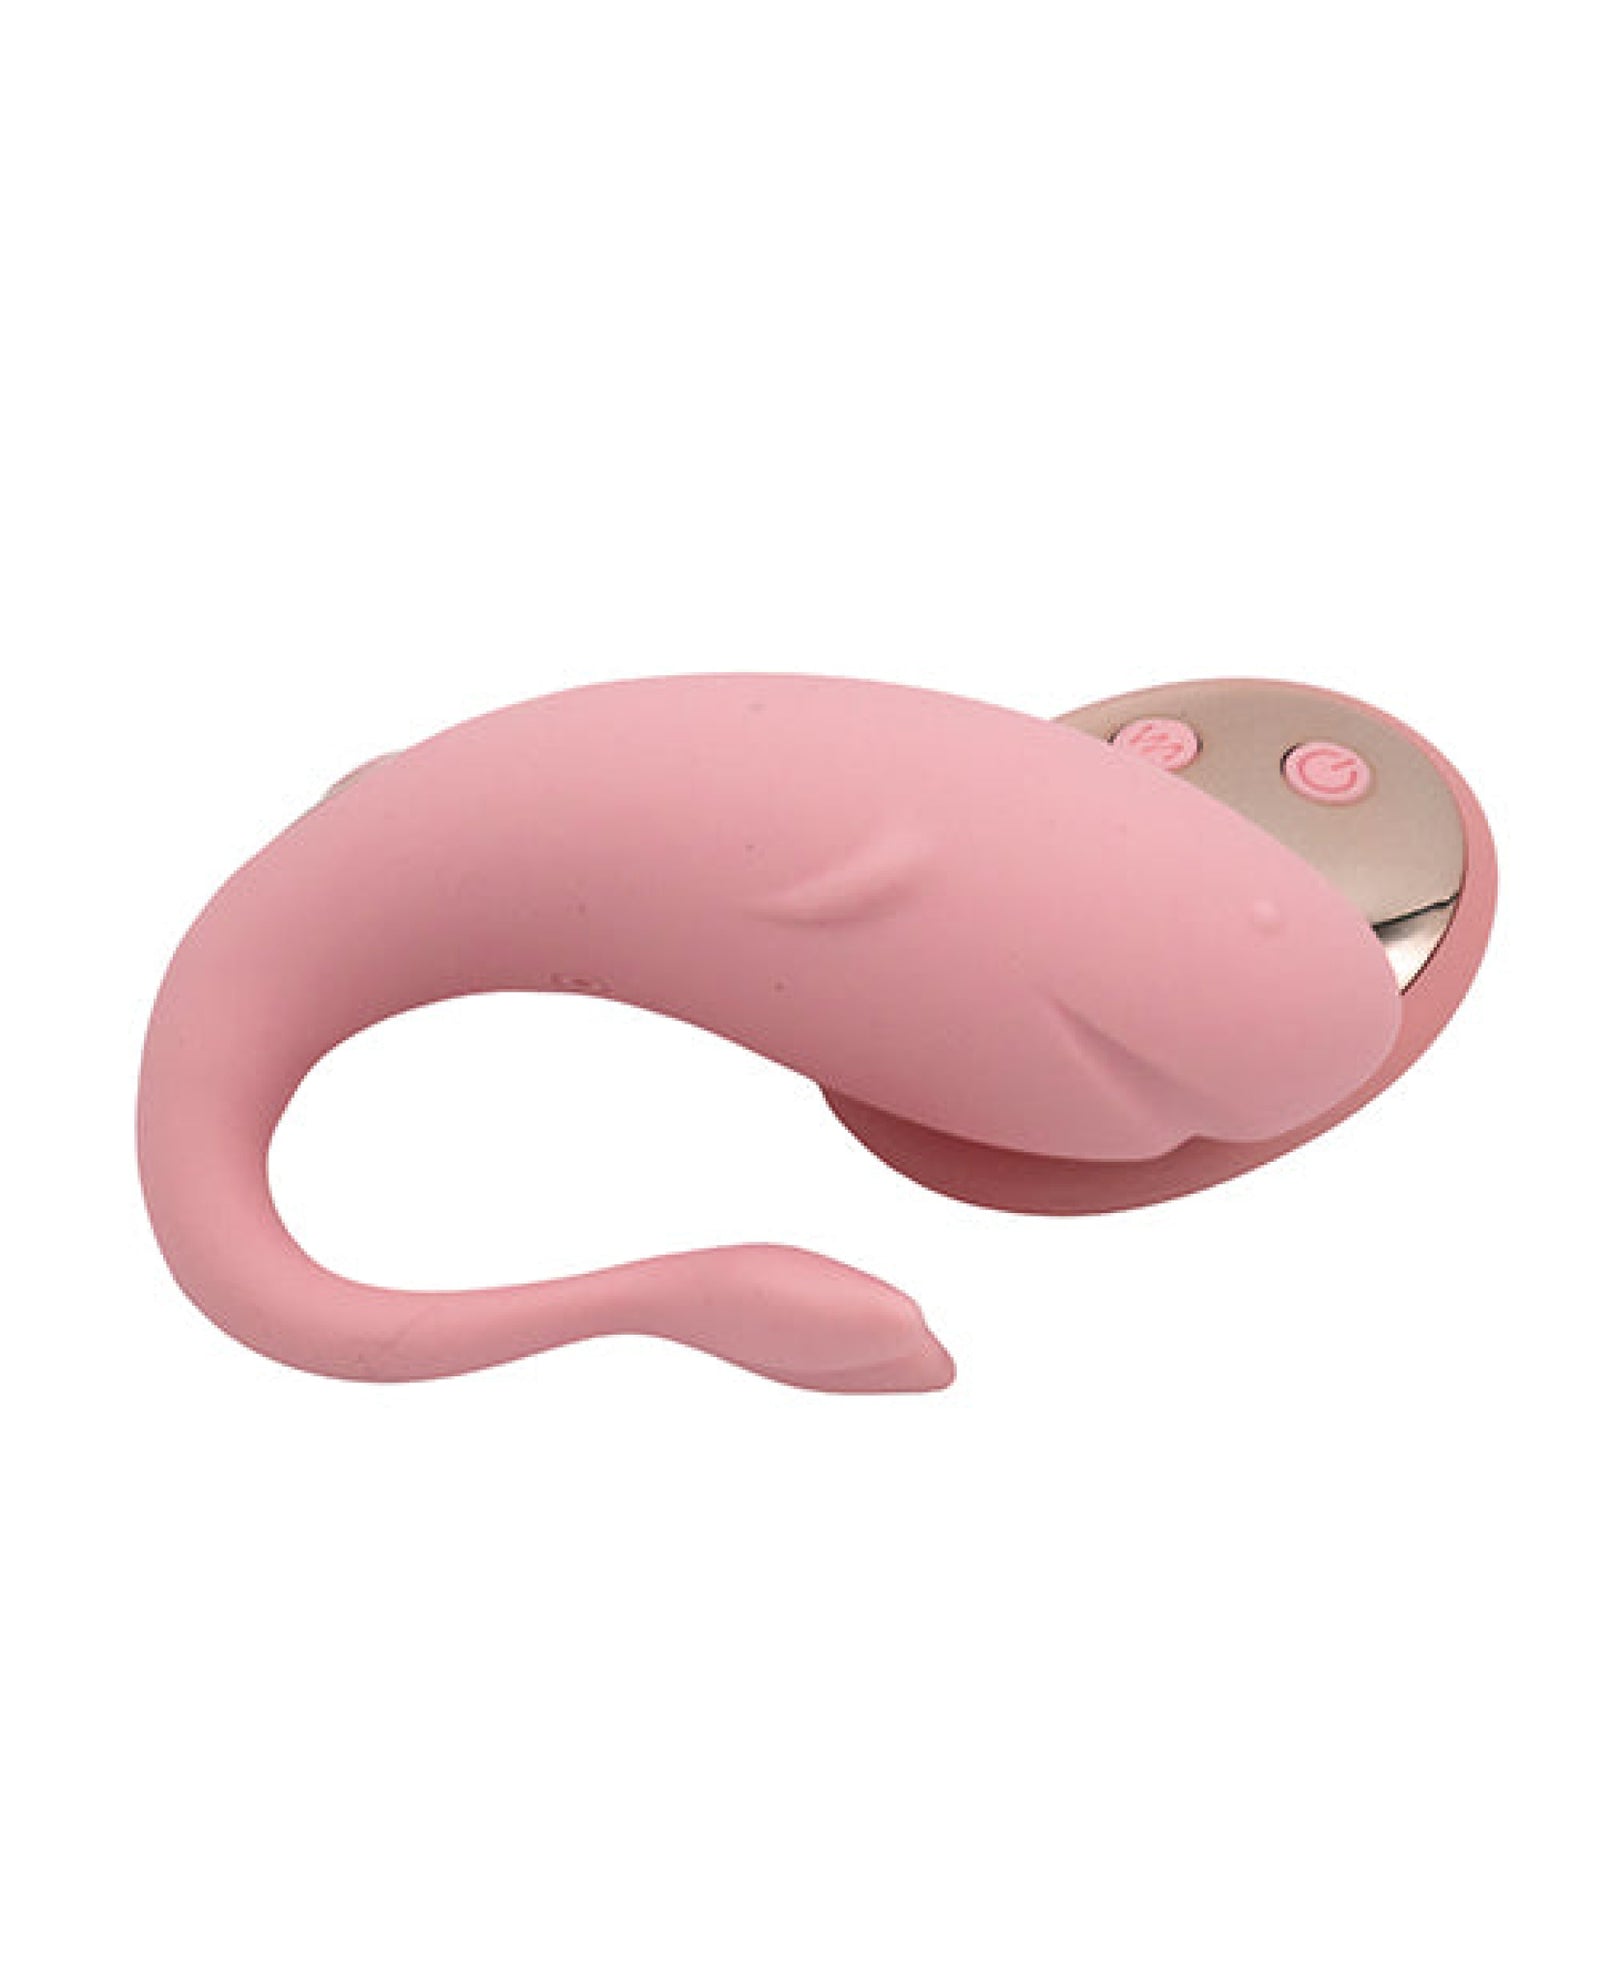 Natalie's Toy Box Orcasm Remote Controlled Wearable Egg Vibrator - Pink Like A Kitten